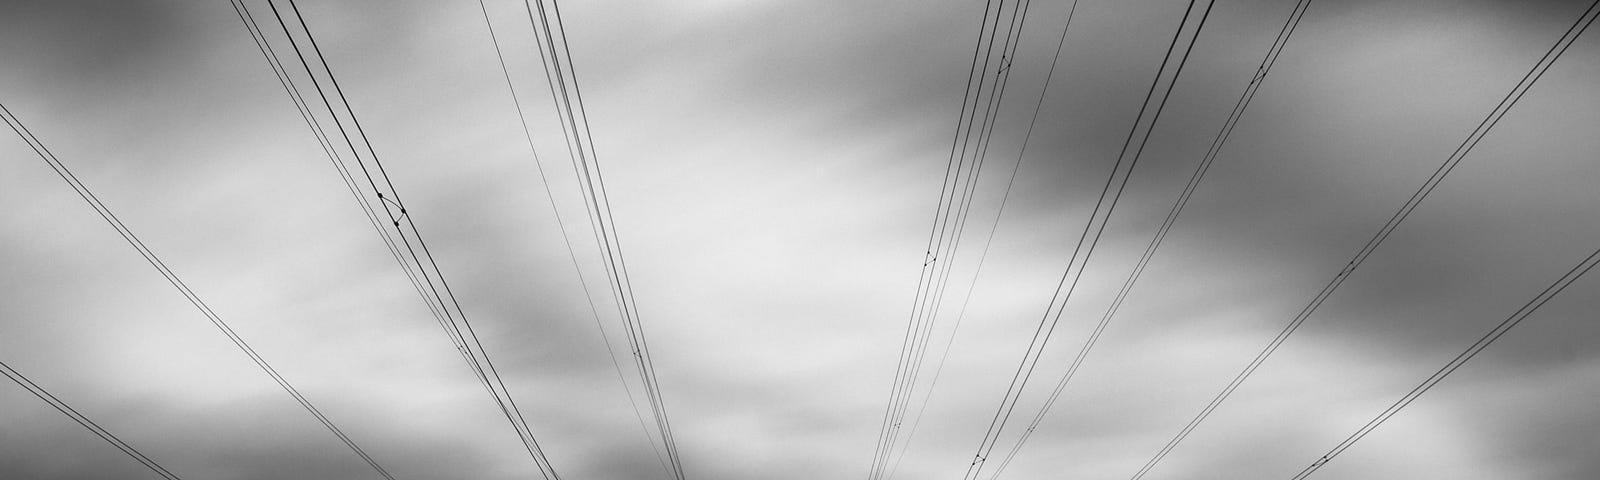 Two sets of power lines against a gray sky.